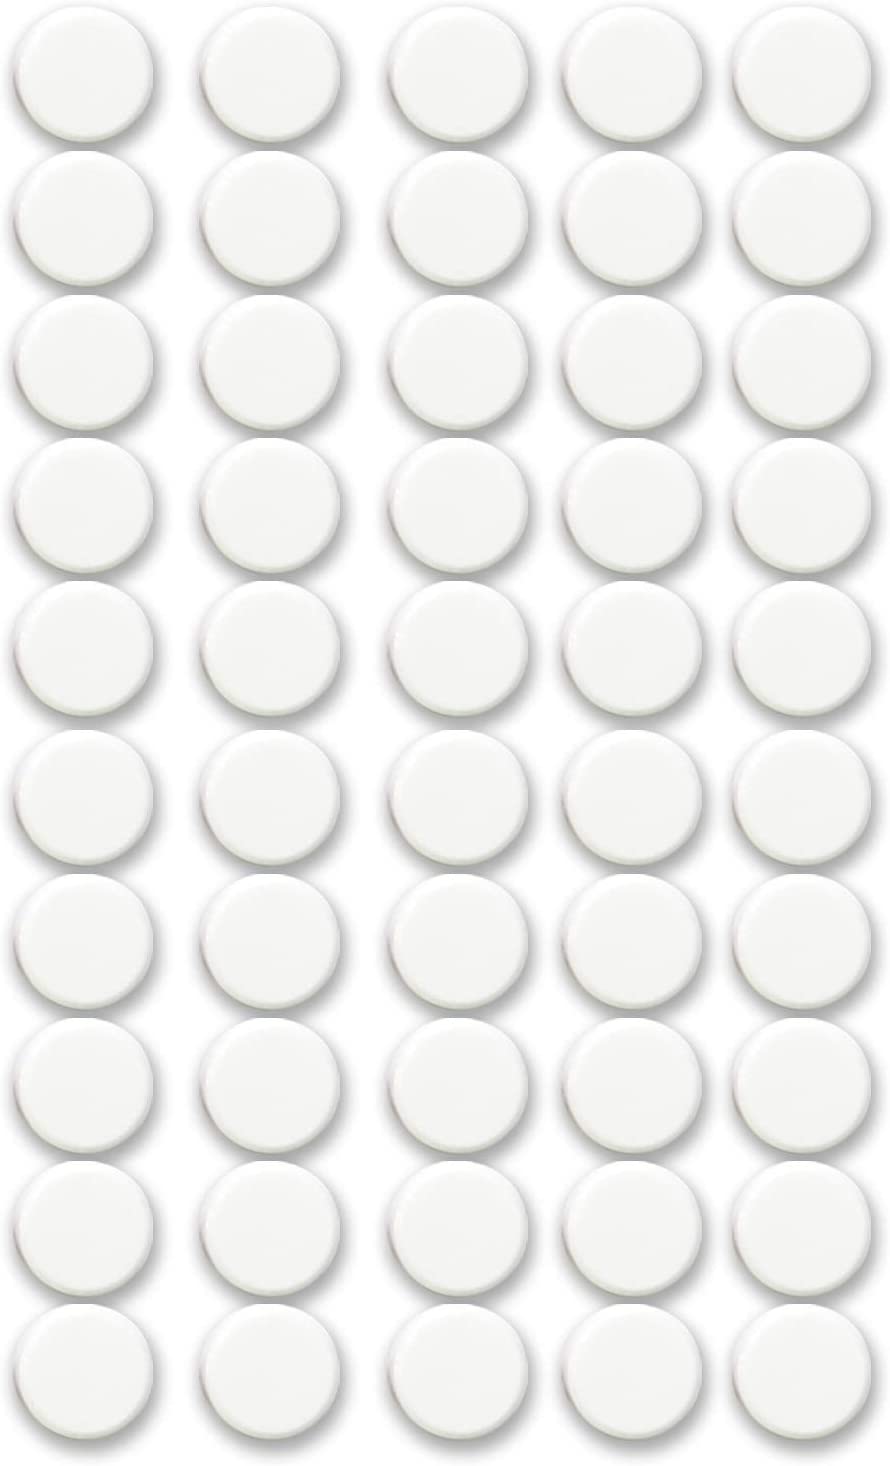 Office Magnets 50 Pack, Heavy Duty Round Refrigerator Whiteboard Locker  Magnets (White)